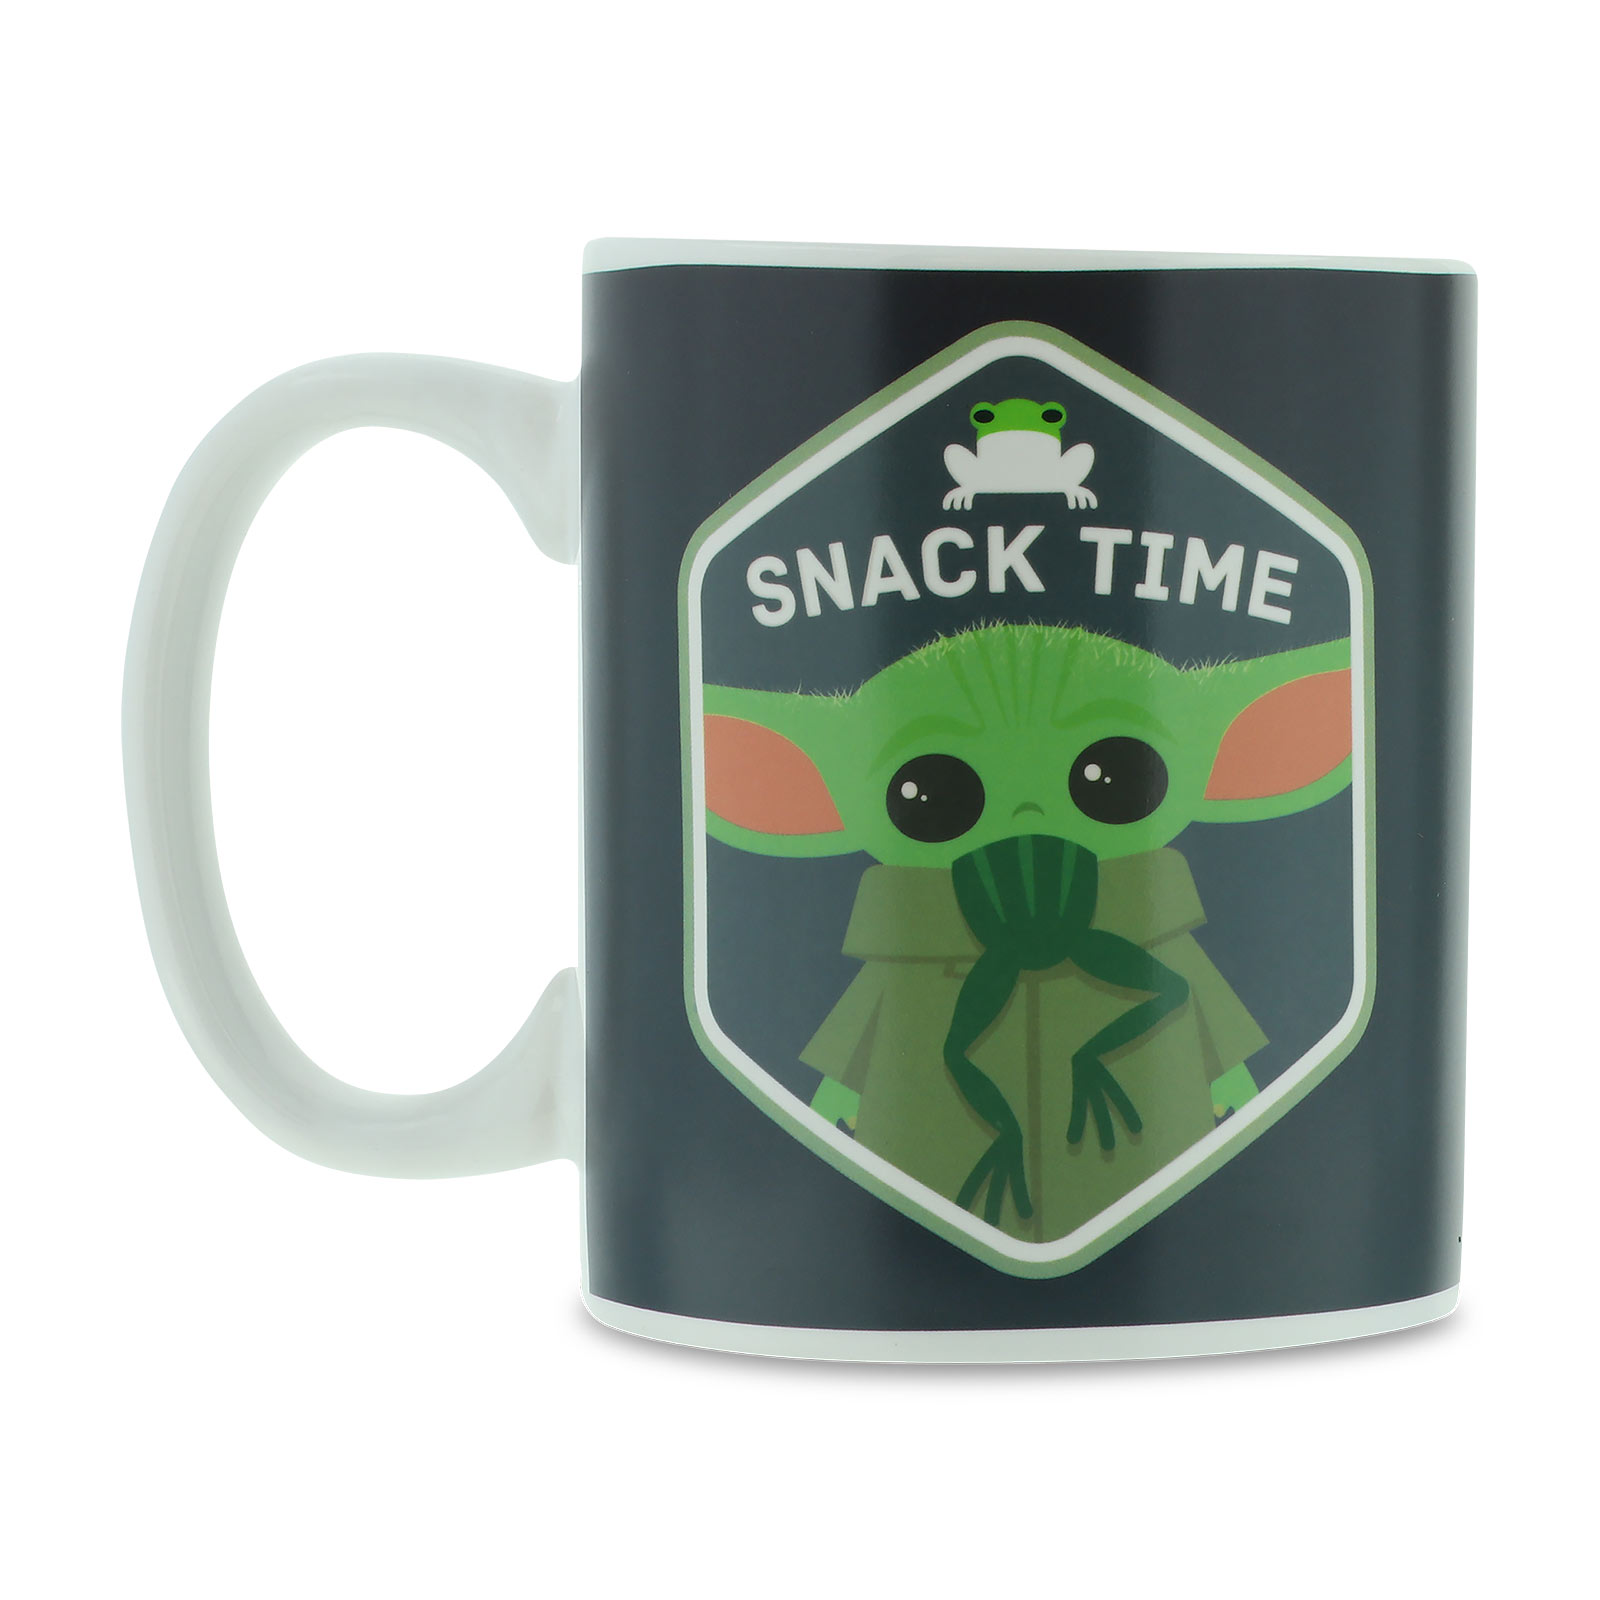 Tasse à effet thermique The Child Snack Time - Star Wars The Mandalorian